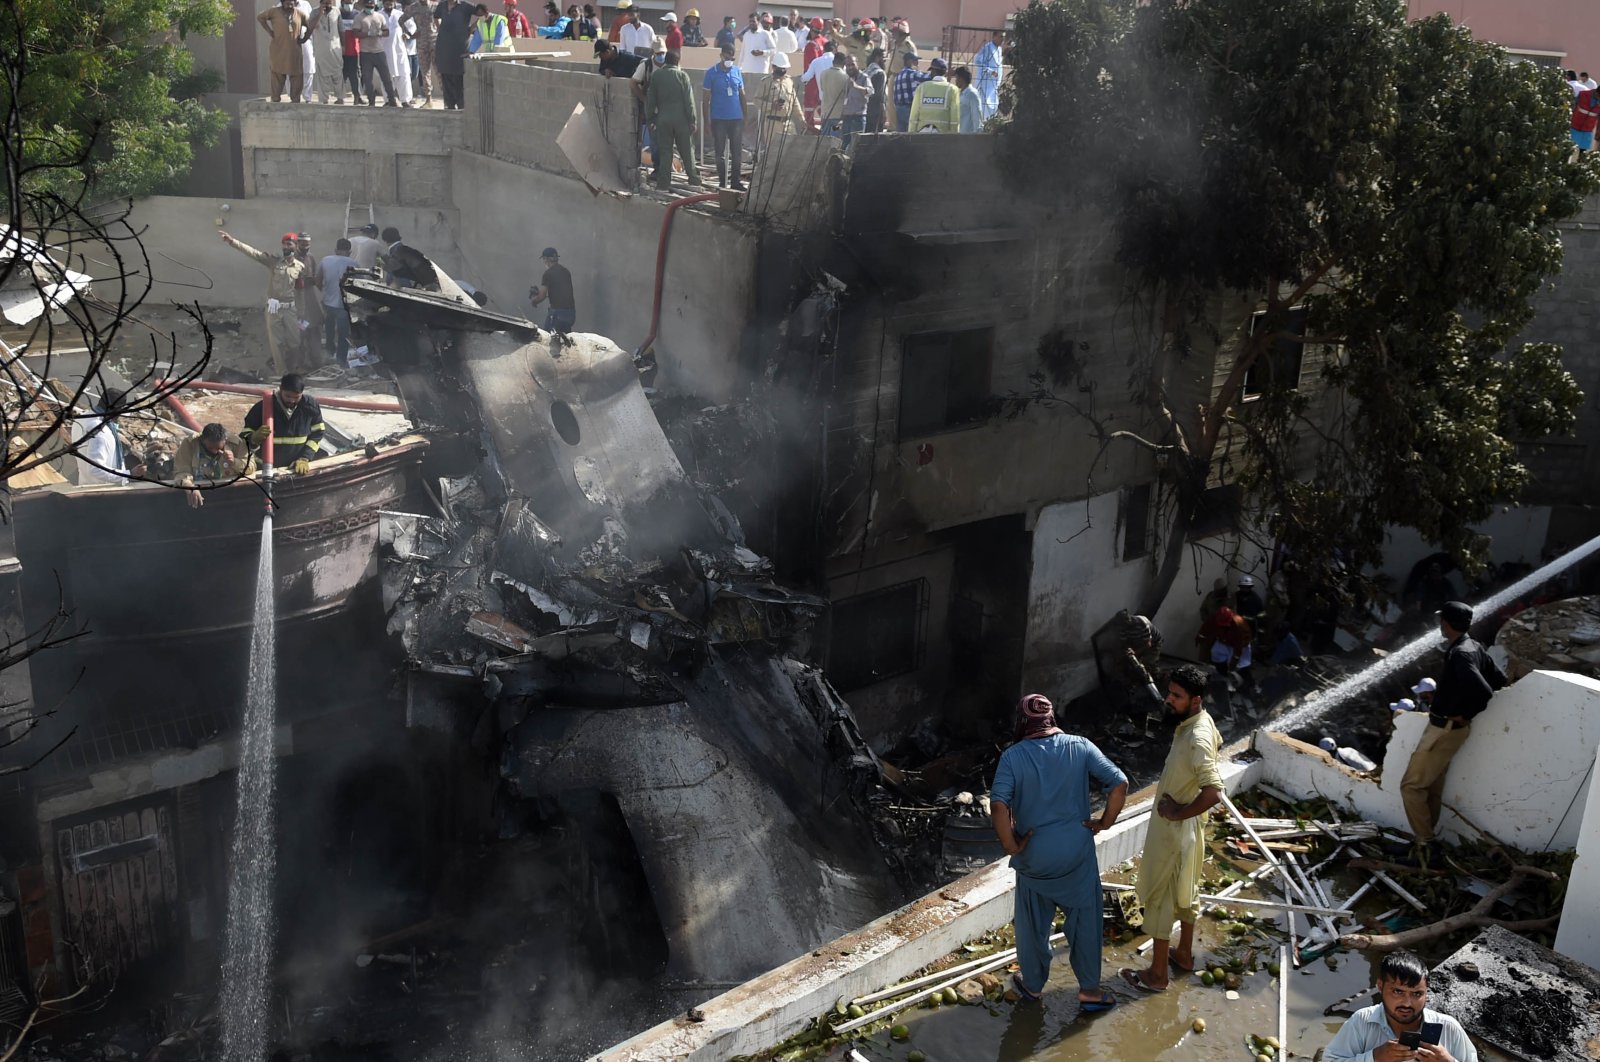 Locals inspect the wreckage of a passenger plane of state-run Pakistan International Airlines, at the scene after it crashed in a residential area, in Karachi, Pakistan, May 22, 2020. (EPA-EFE Photo)